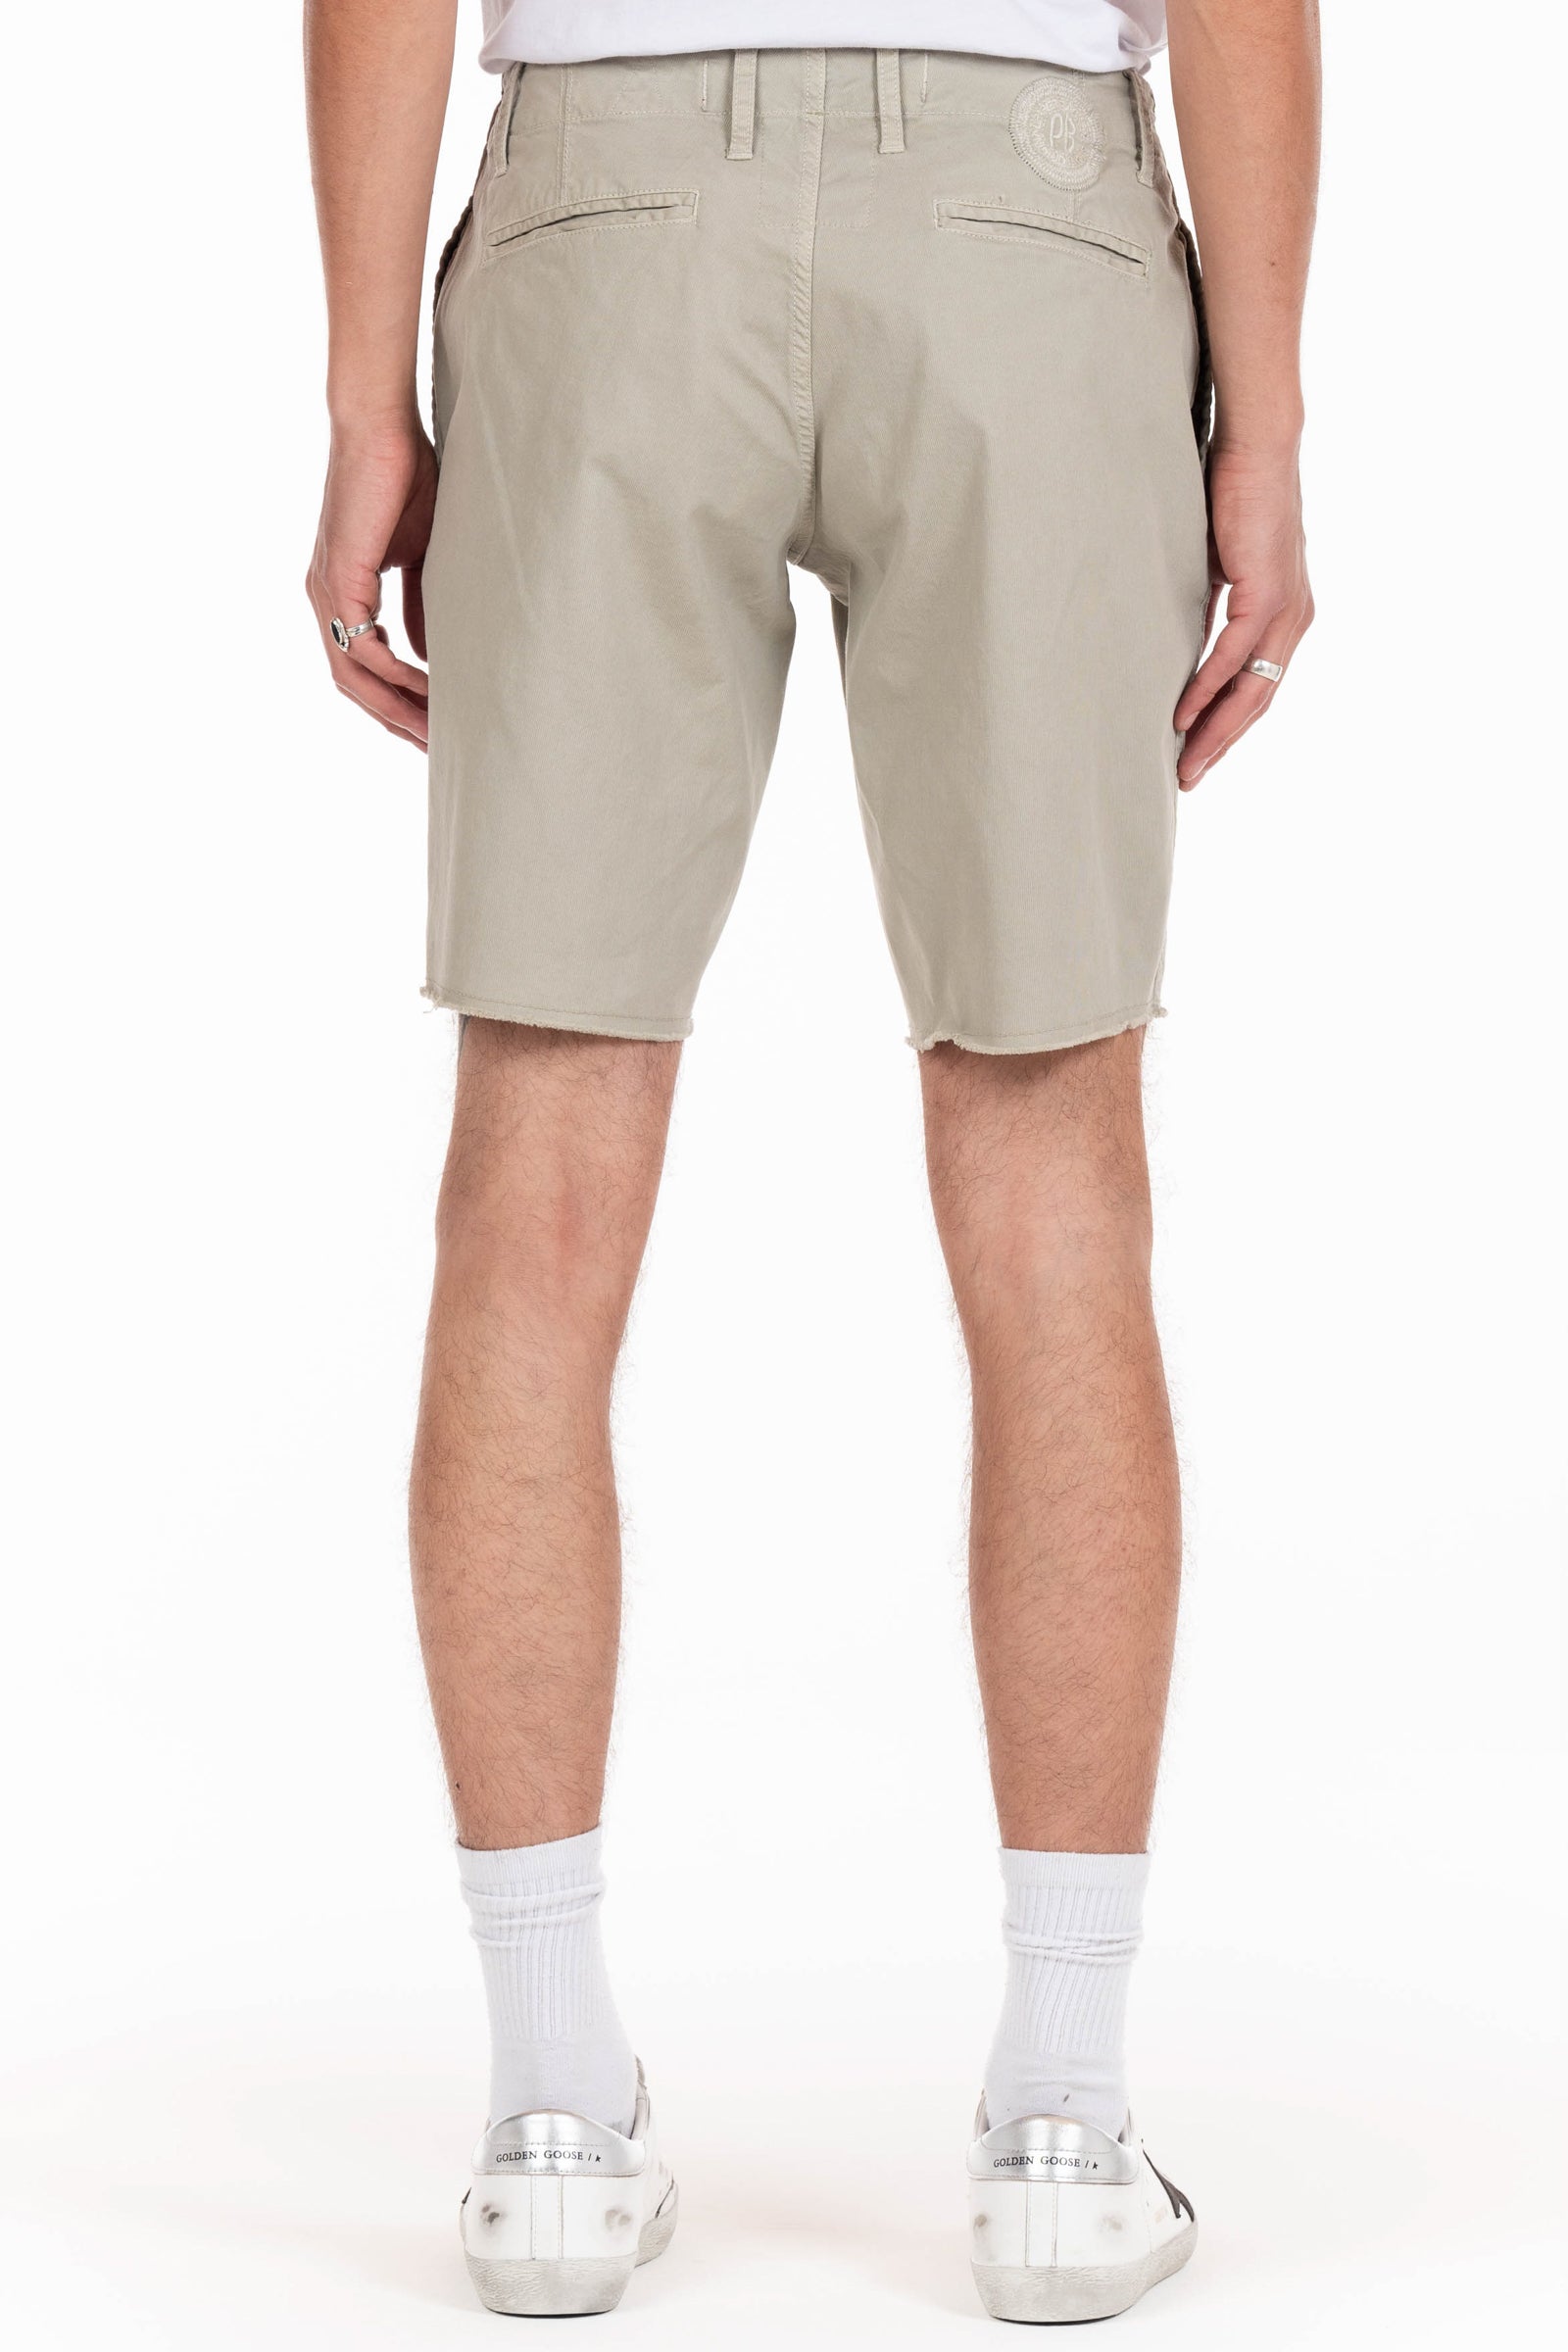 Original Paperbacks Rockland Chino Short in Bone on Model Cropped Back View